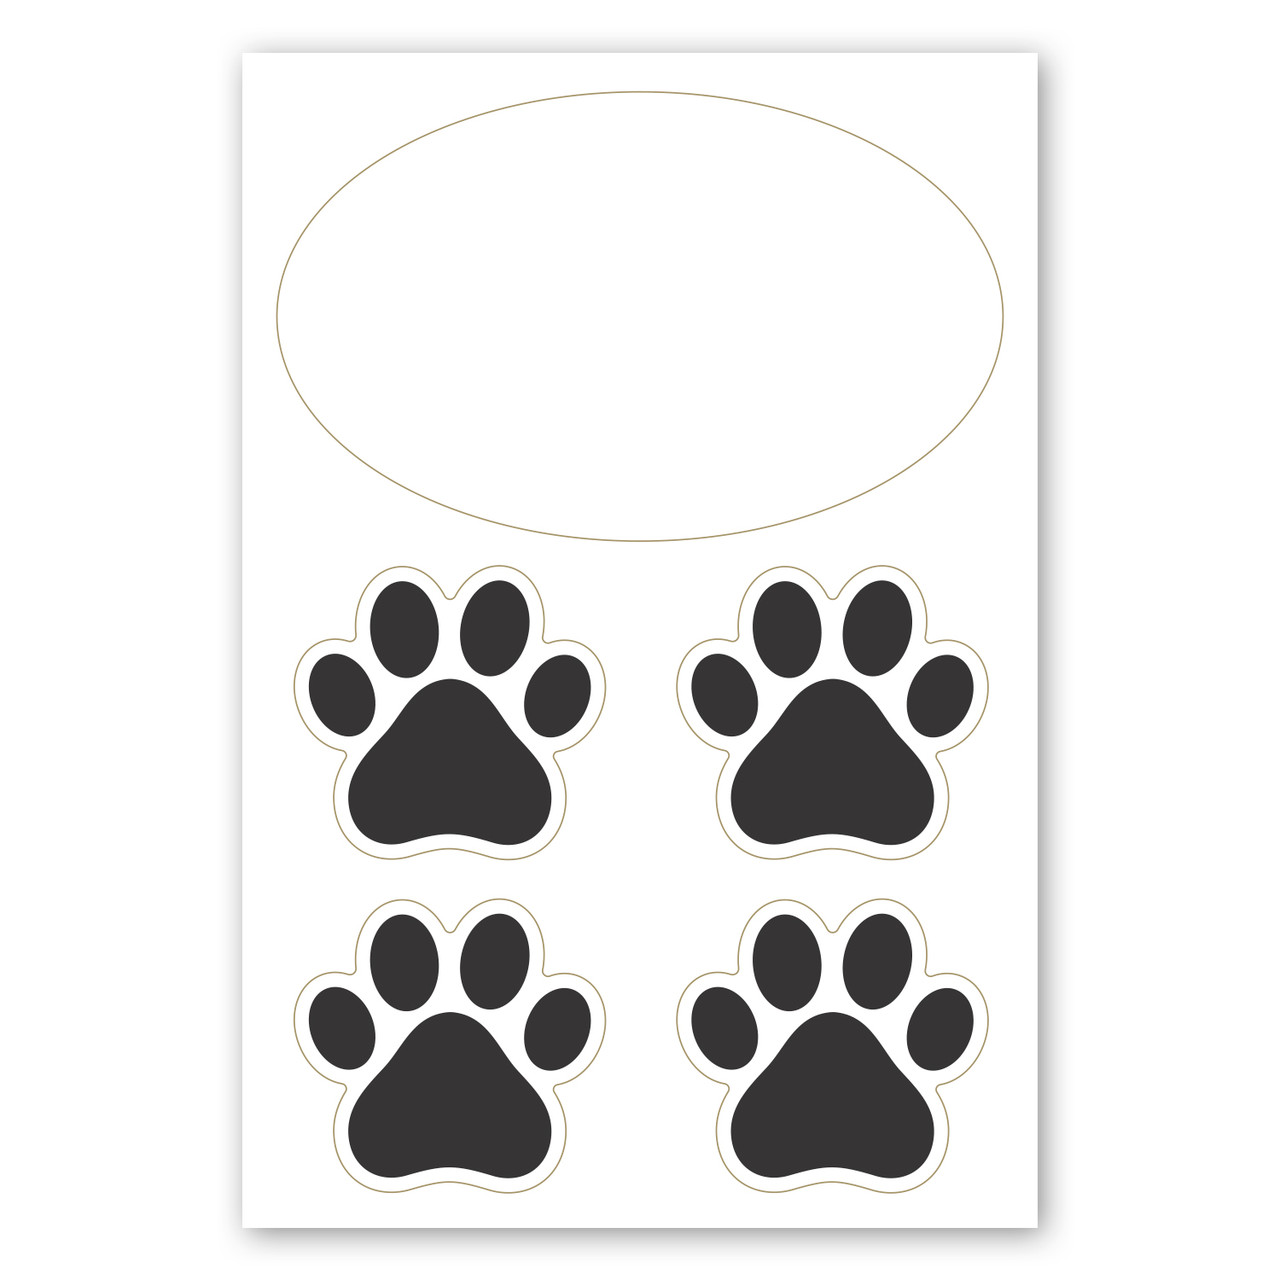 Custom 2 in 1 Oval Car Magnet with 4  Paw Prints CS75